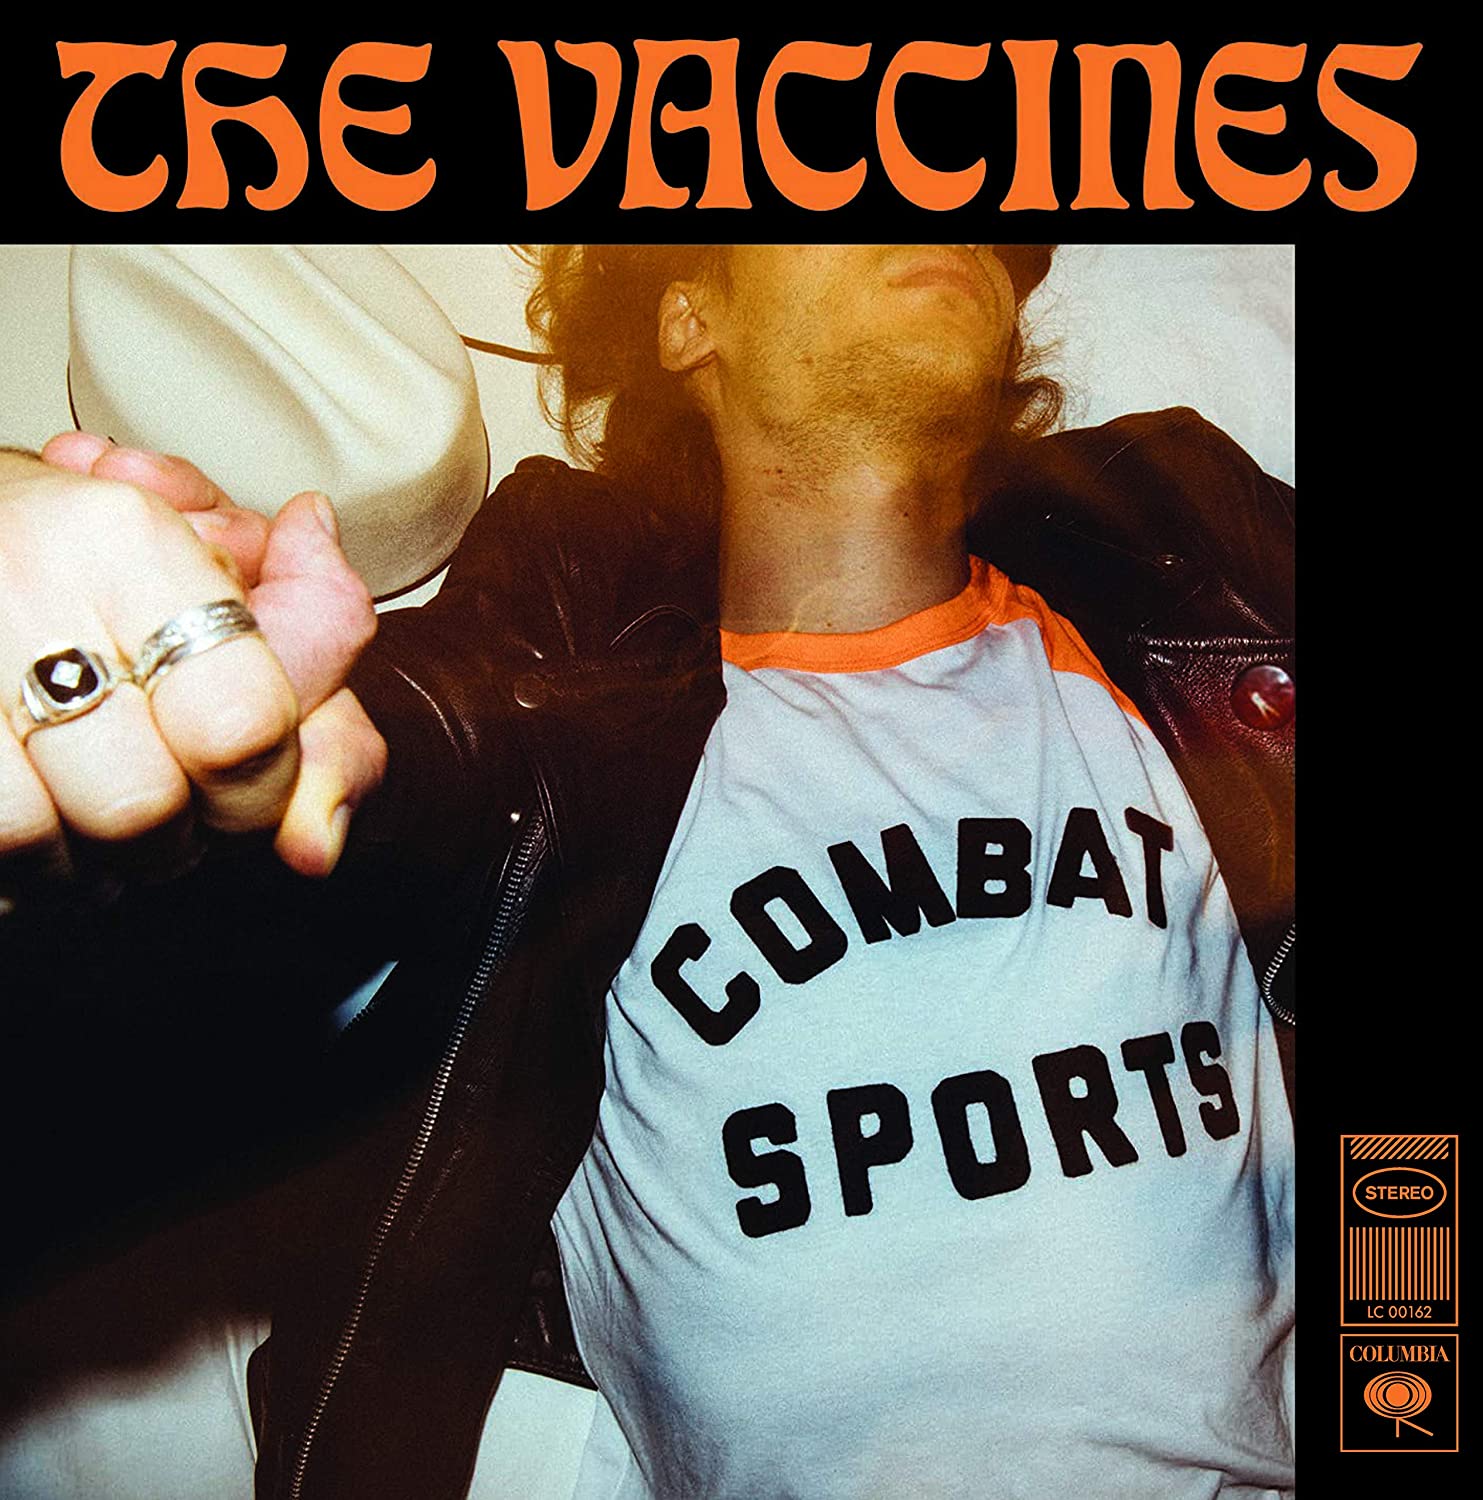 CD The Vaccines - Combat sports